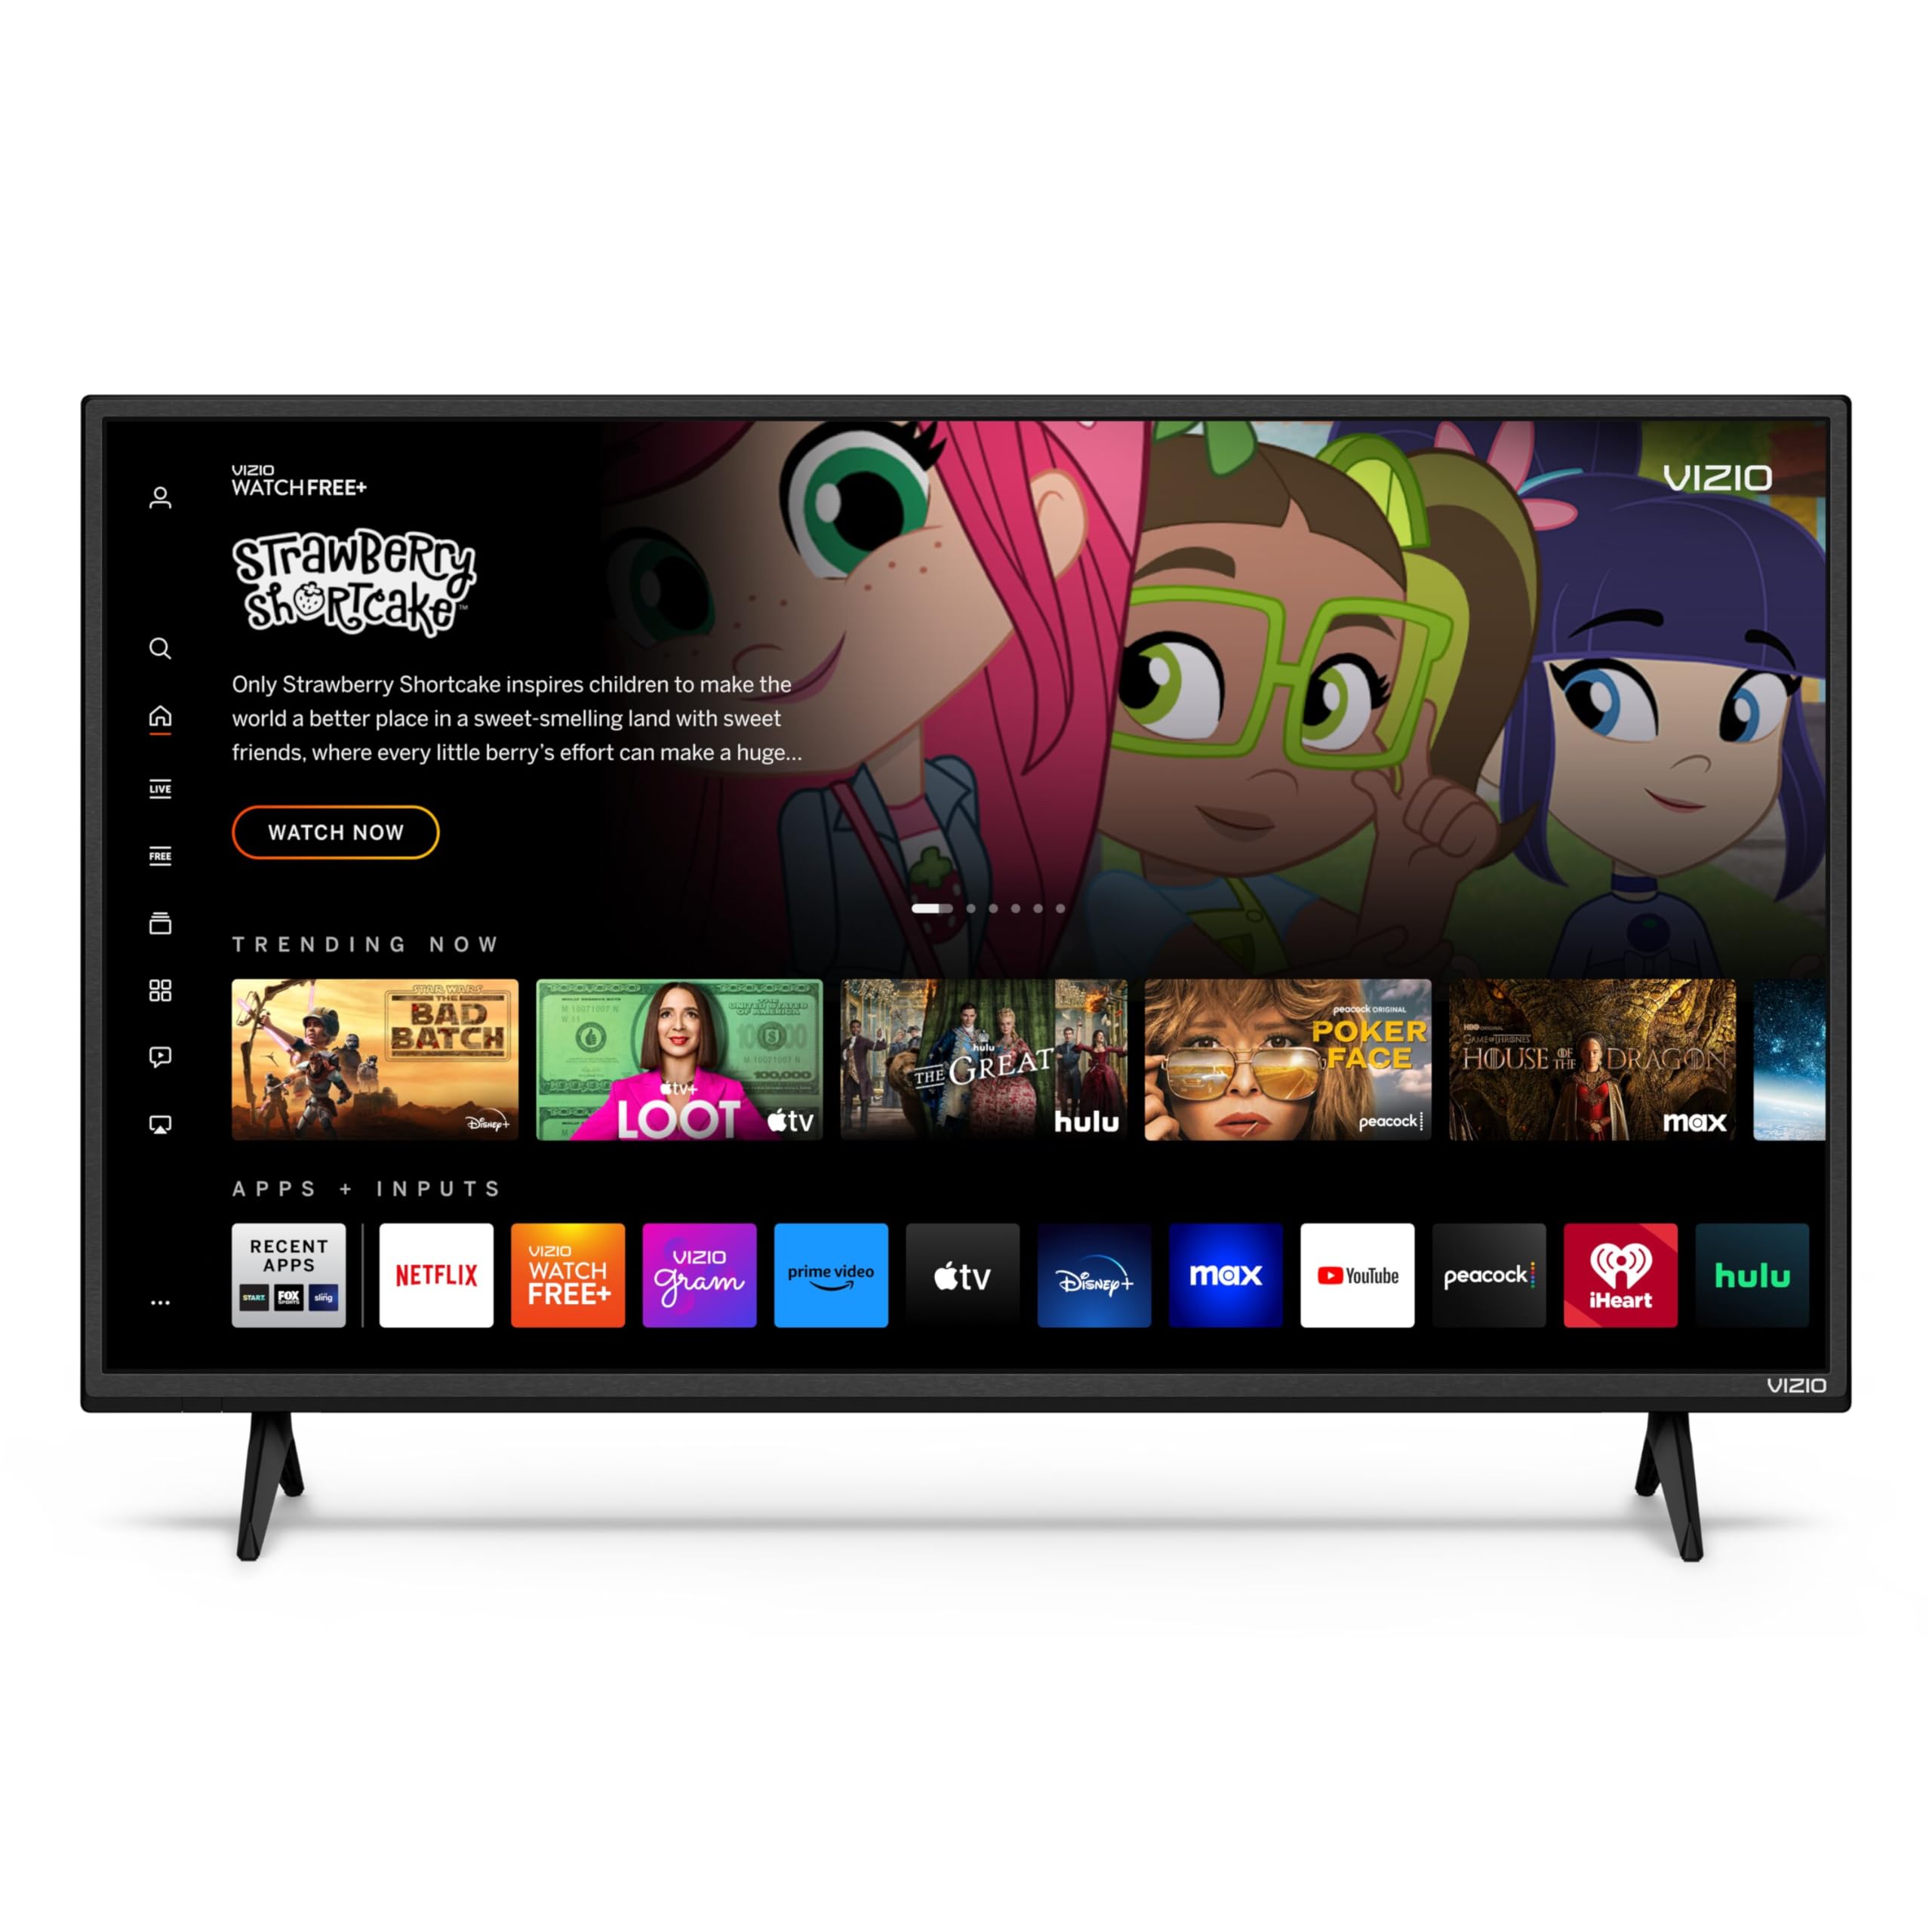 VIZIO 40-inch D-Series Full HD 1080p Smart TV with AMD FreeSync, Apple AirPlay and Chromecast Built-in, Alexa Compatibility, D40f-J09, 2022 Model $158